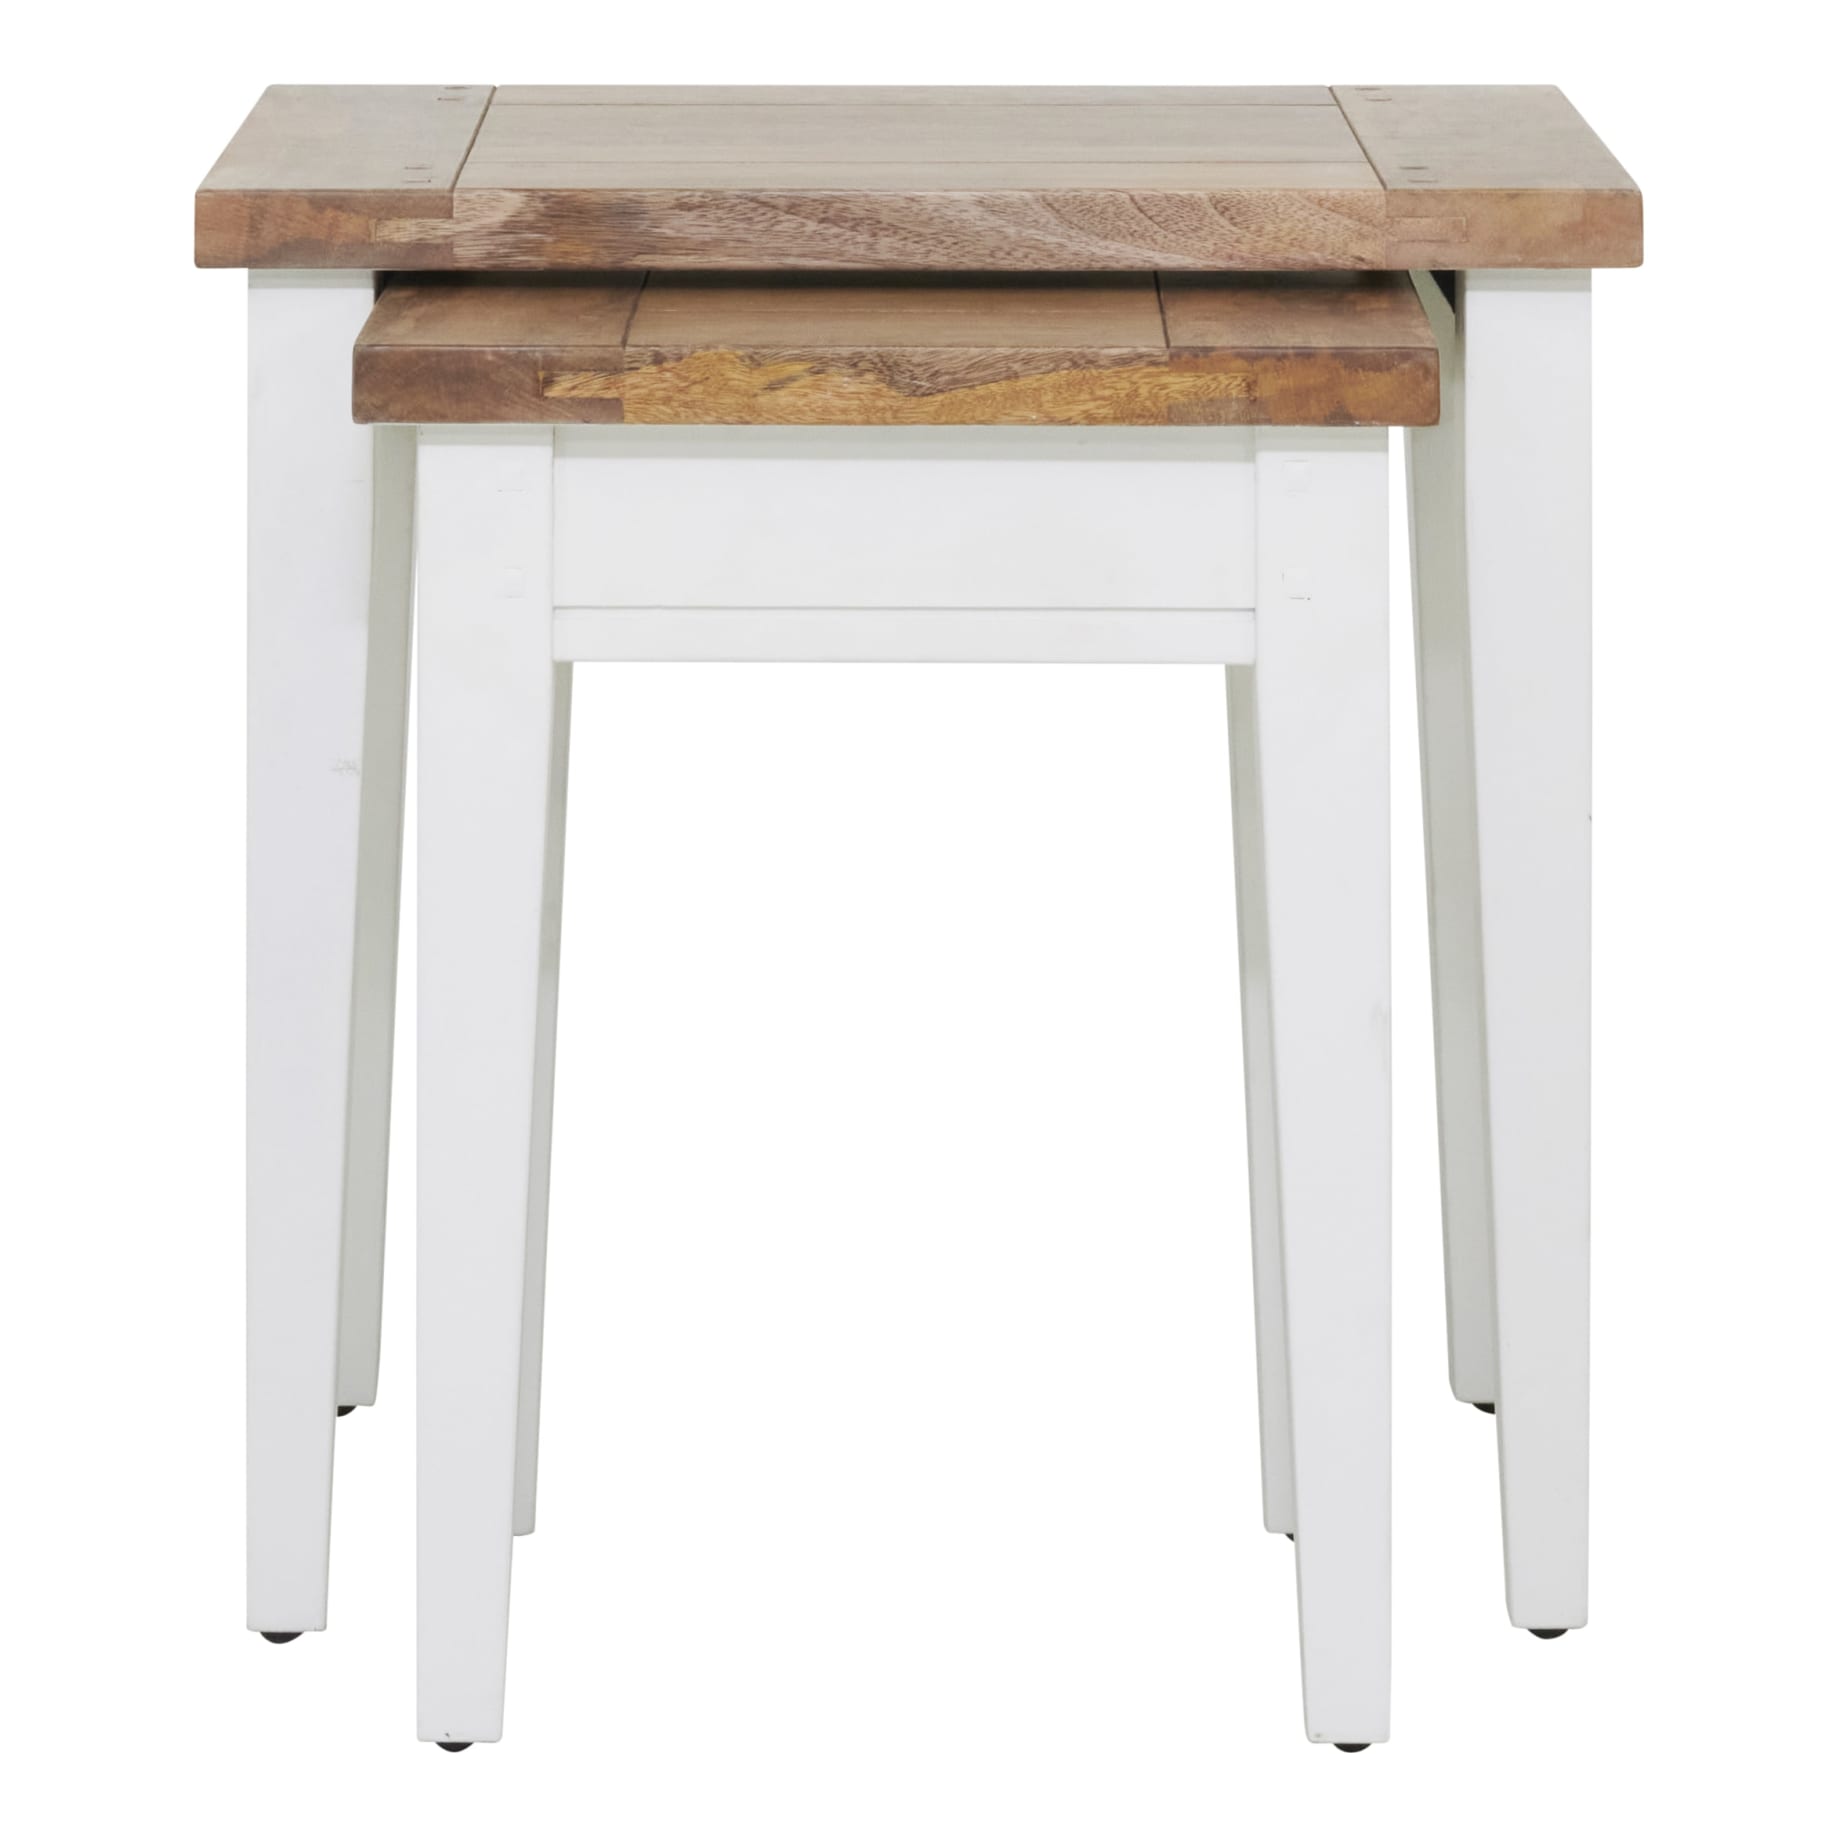 Mango Creek Nest of Tables in White / Clear Lacquer